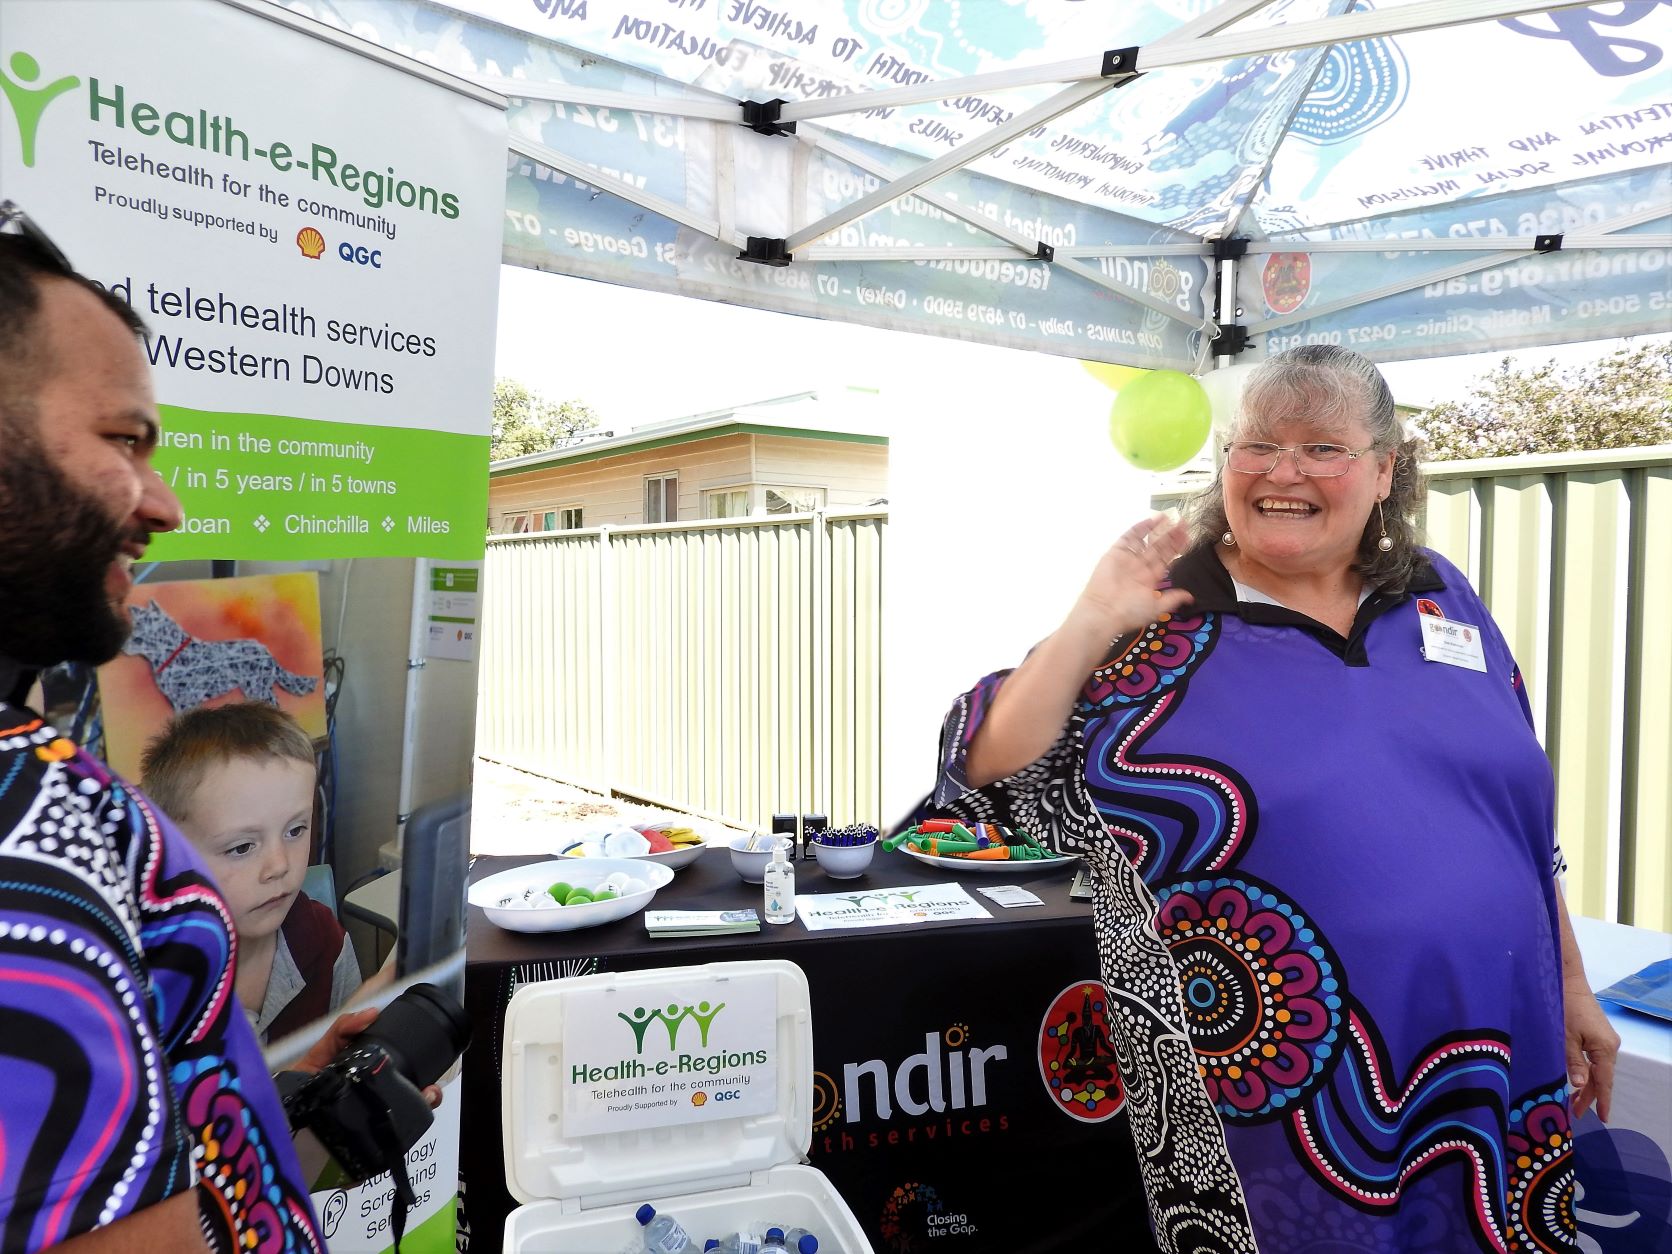 Health-e-Regions booth at the event with Goondir Health Services Allied Health & Specialist Coordinator Debra Robinson.